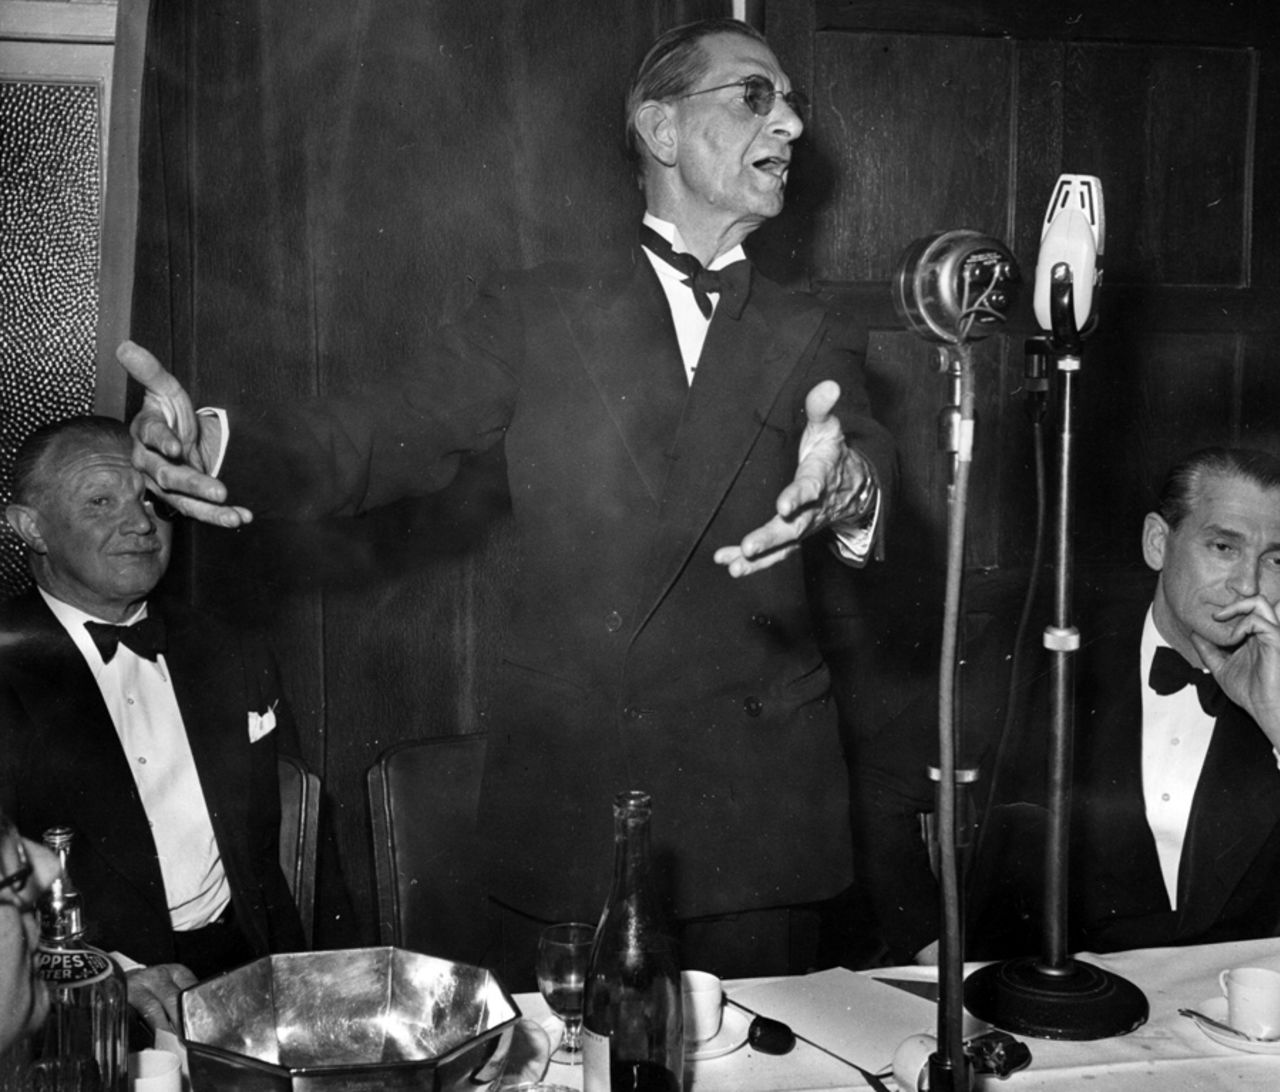 Neville Cardus makes a speech at the Cricket Writers' Club dinner for the touring West Indies side, 1950